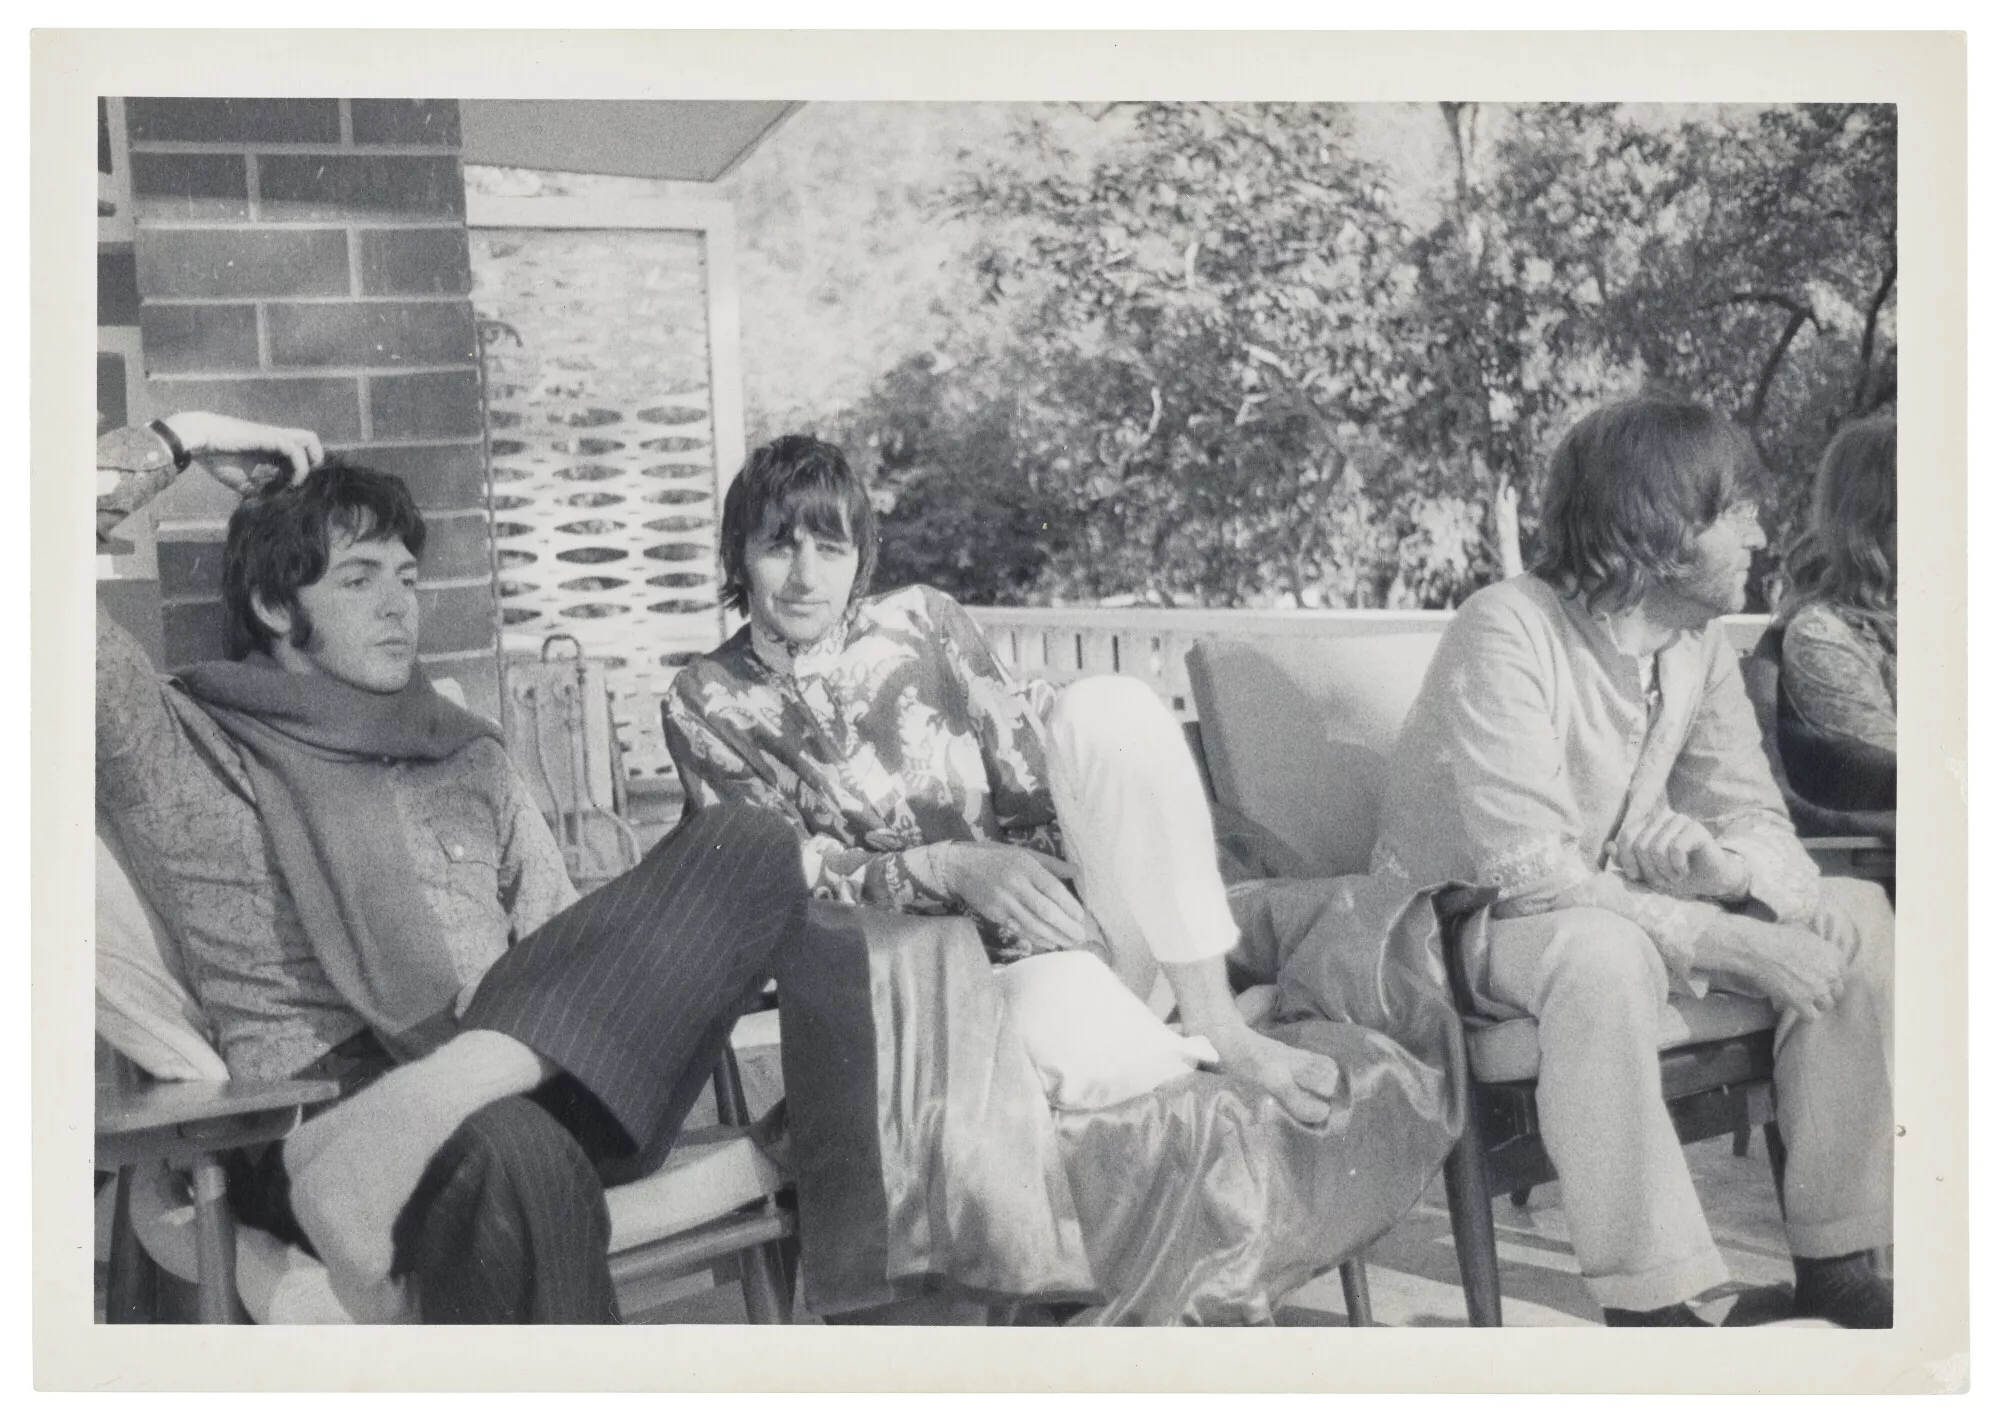 Christie's Pattie Boyd Collection - the beatles